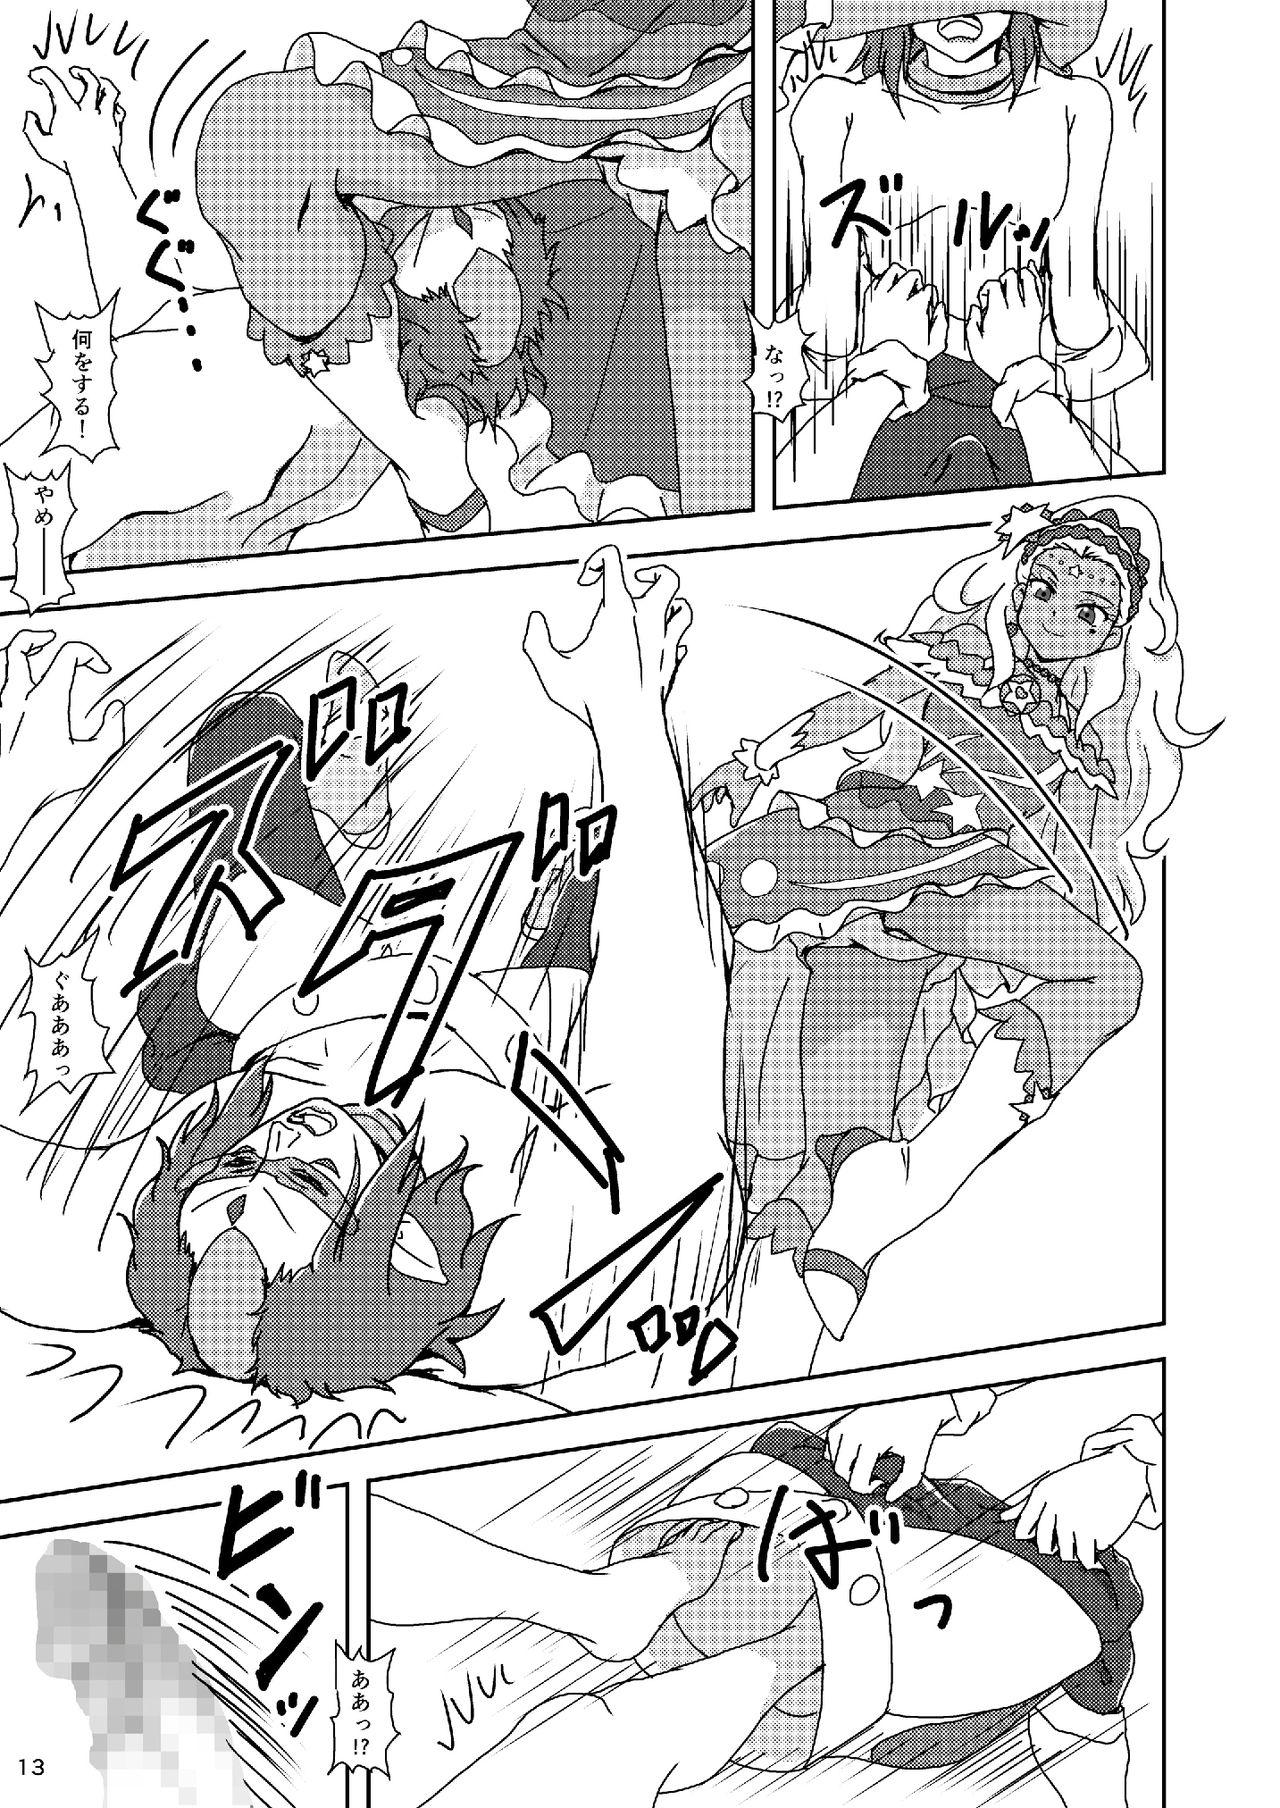 Penetration スター☆トゥインクルズリキュア - Star twinkle precure Whooty - Page 12